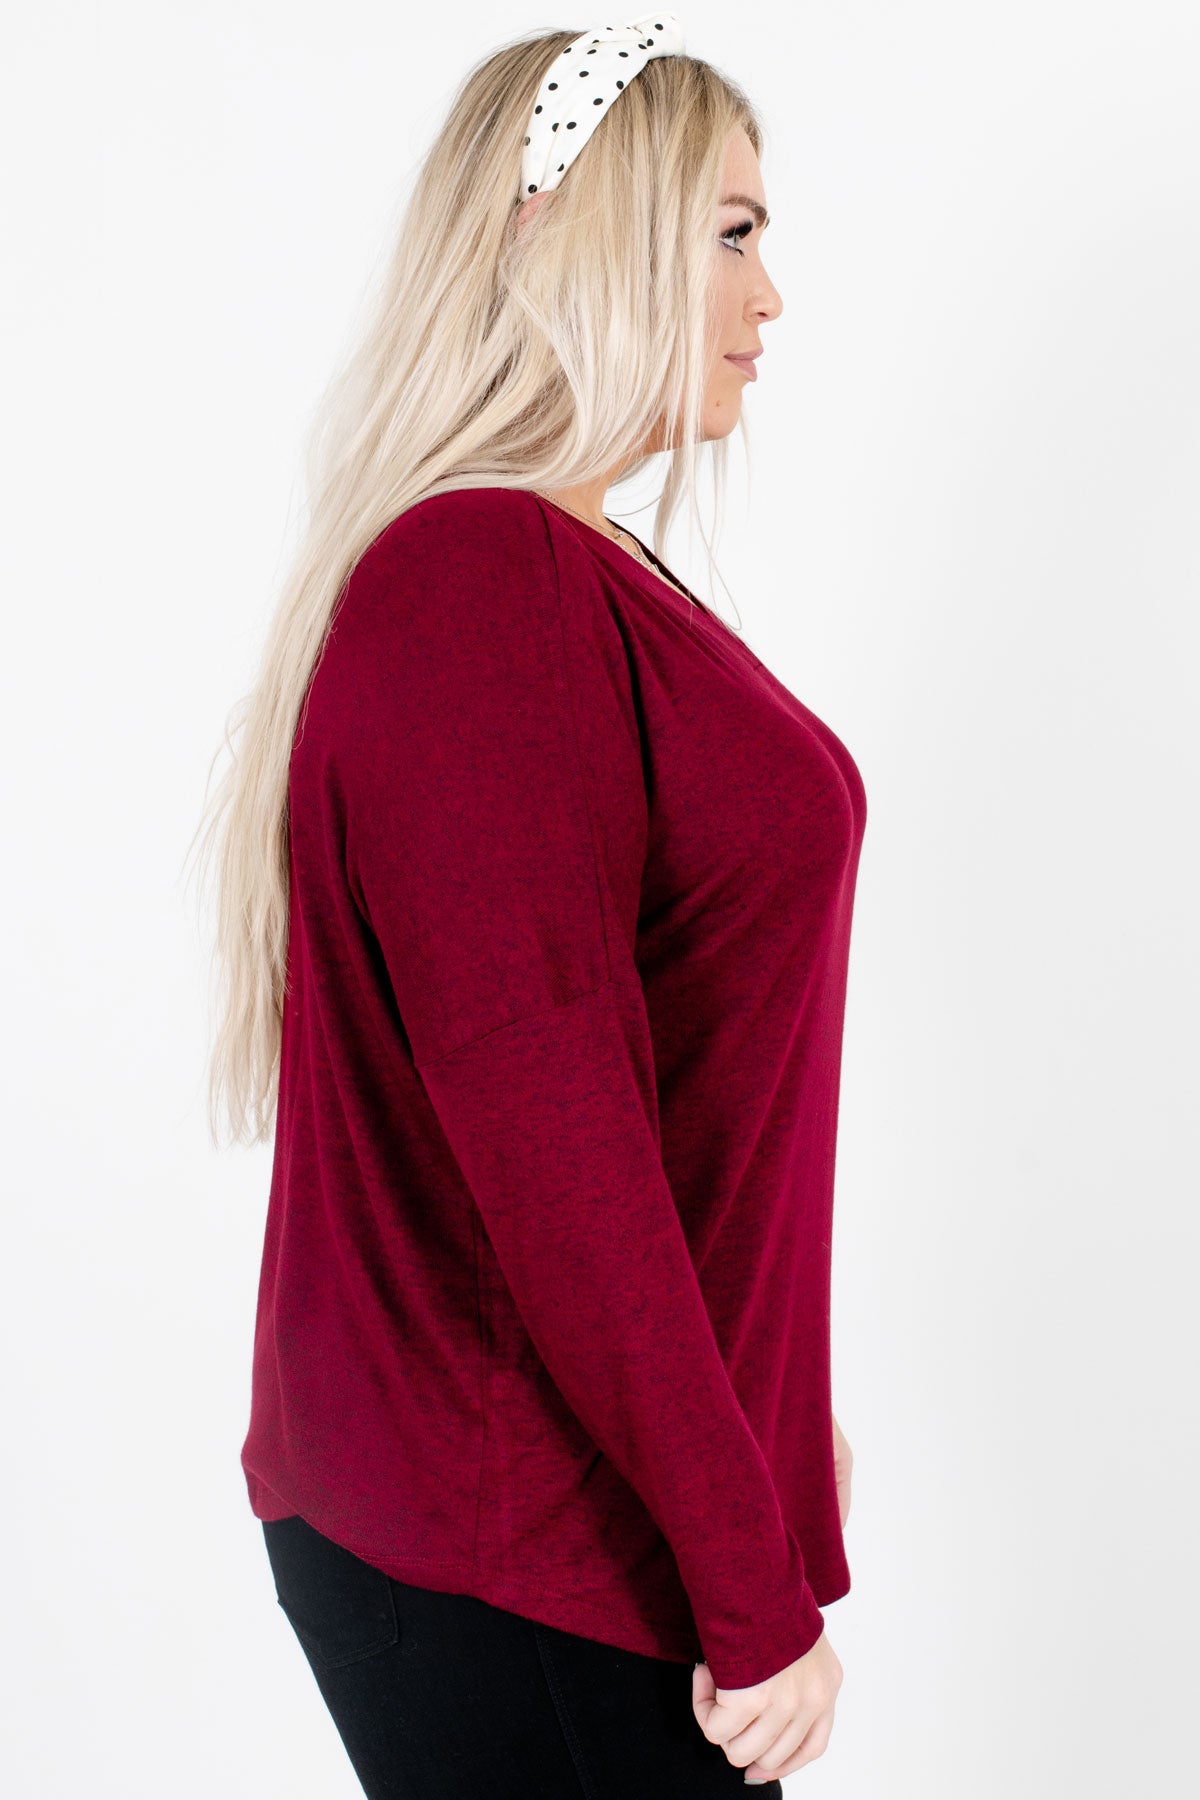 Burgundy Cozy and Warm Boutique Tops for Women